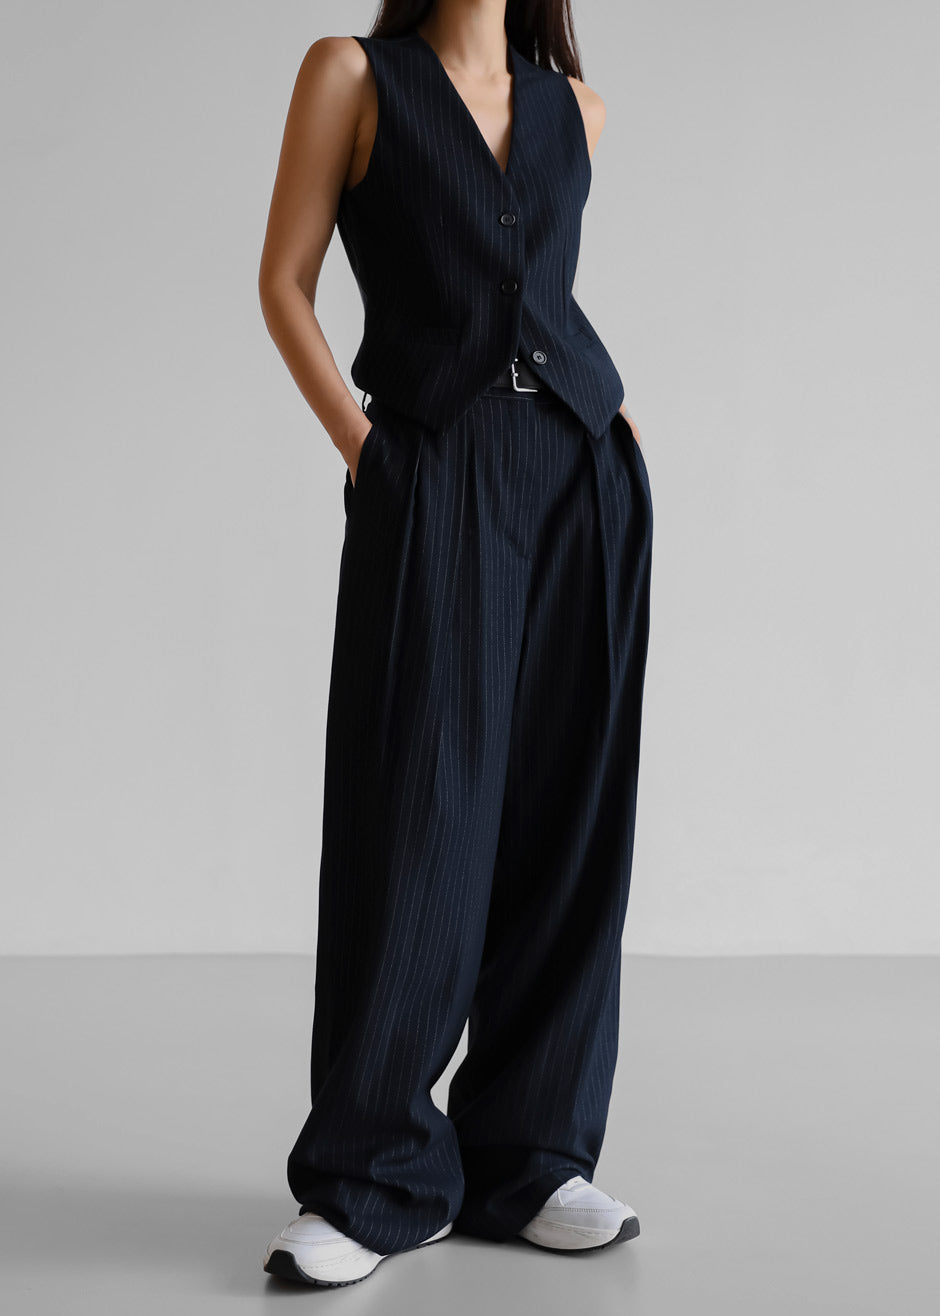 Flashdance Pant - French Navy – Sare Store